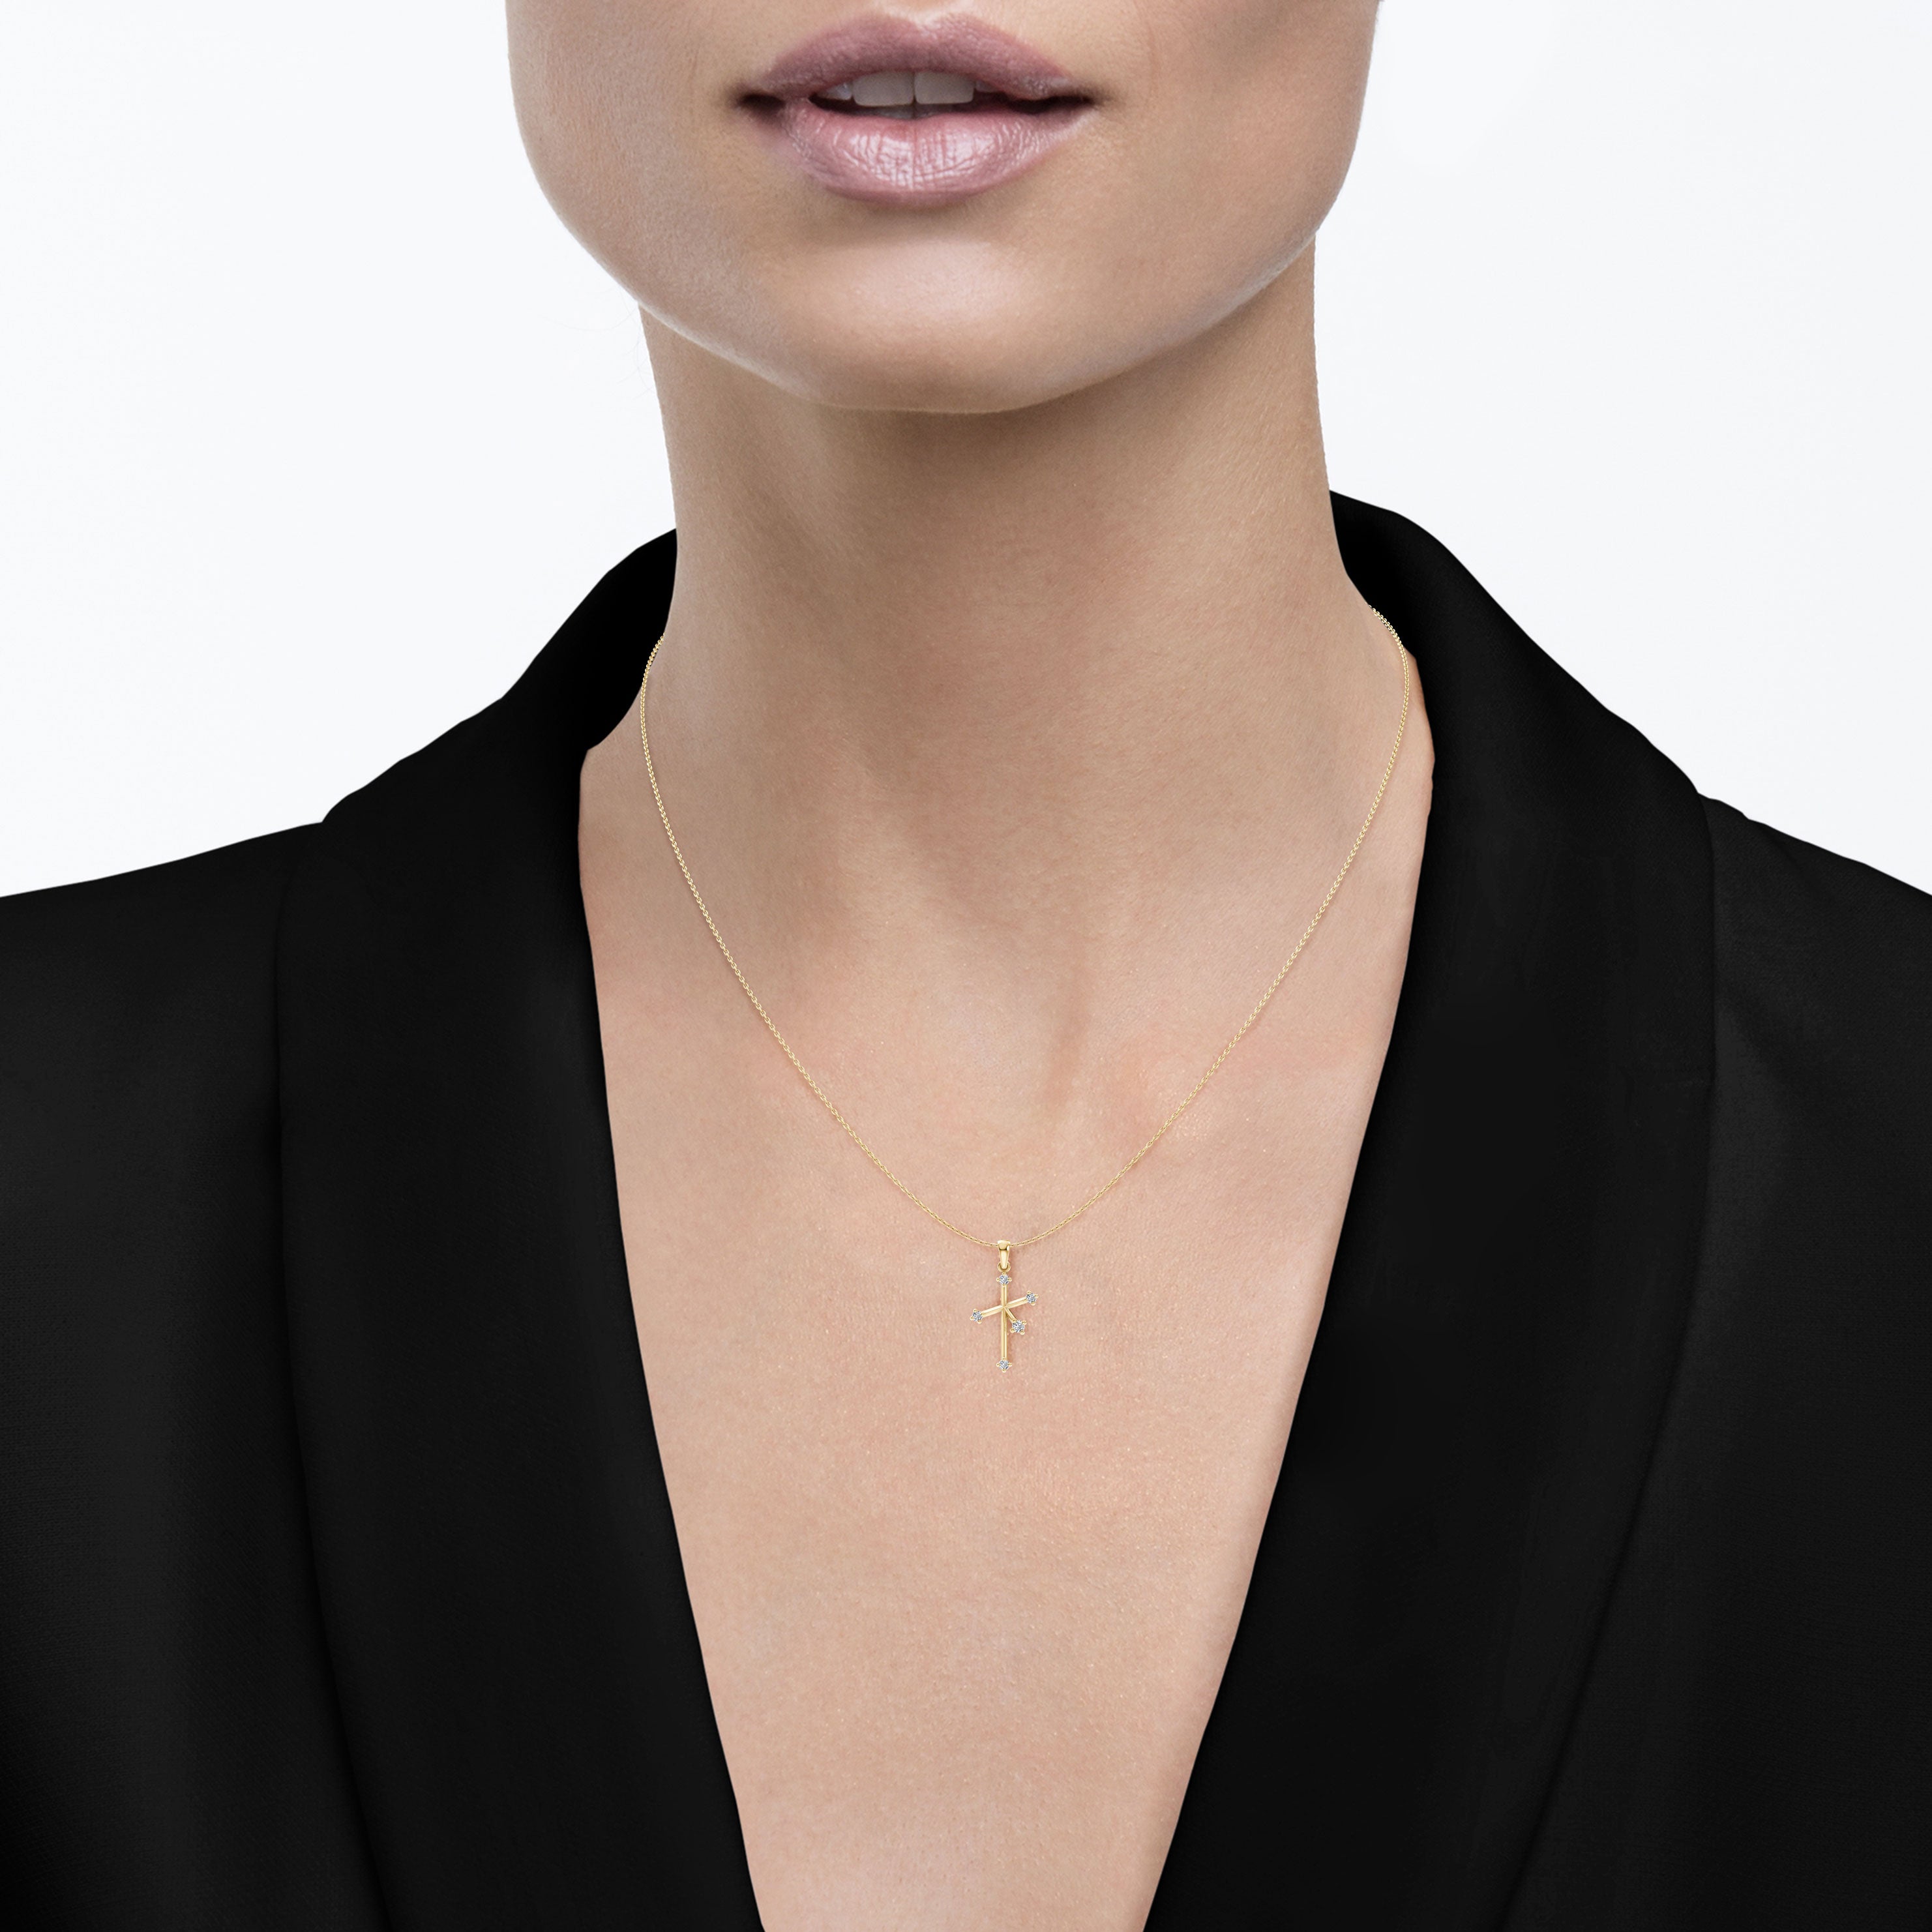 Shimansky - Women Wearing the Southern Cross Small Diamond Pendant Crafted in 14K Yellow Gold